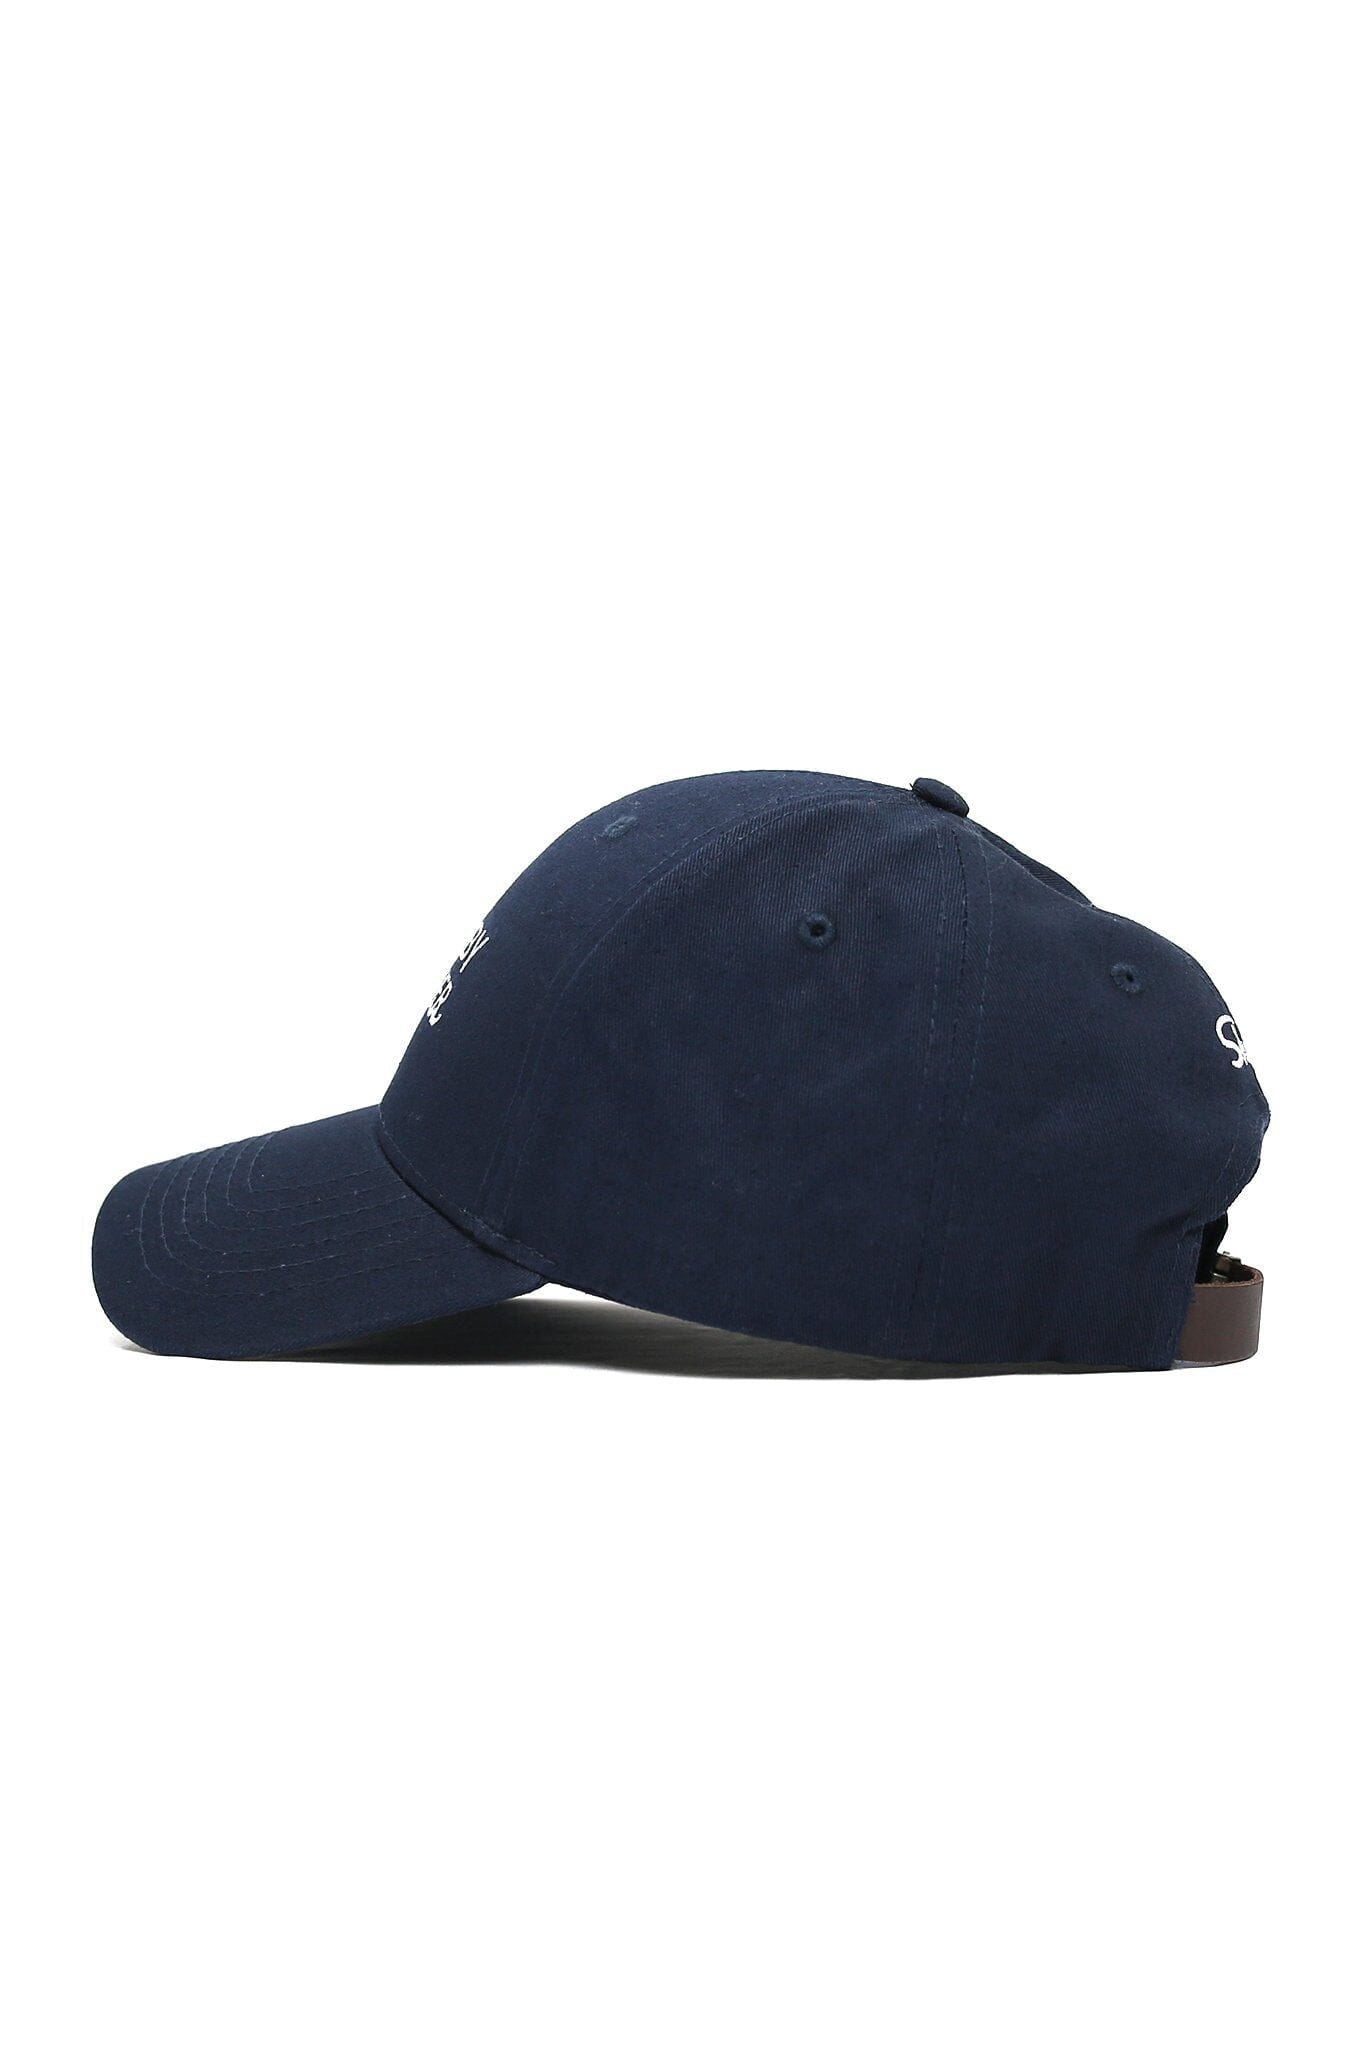 BORN BY WATER WAVES CAP